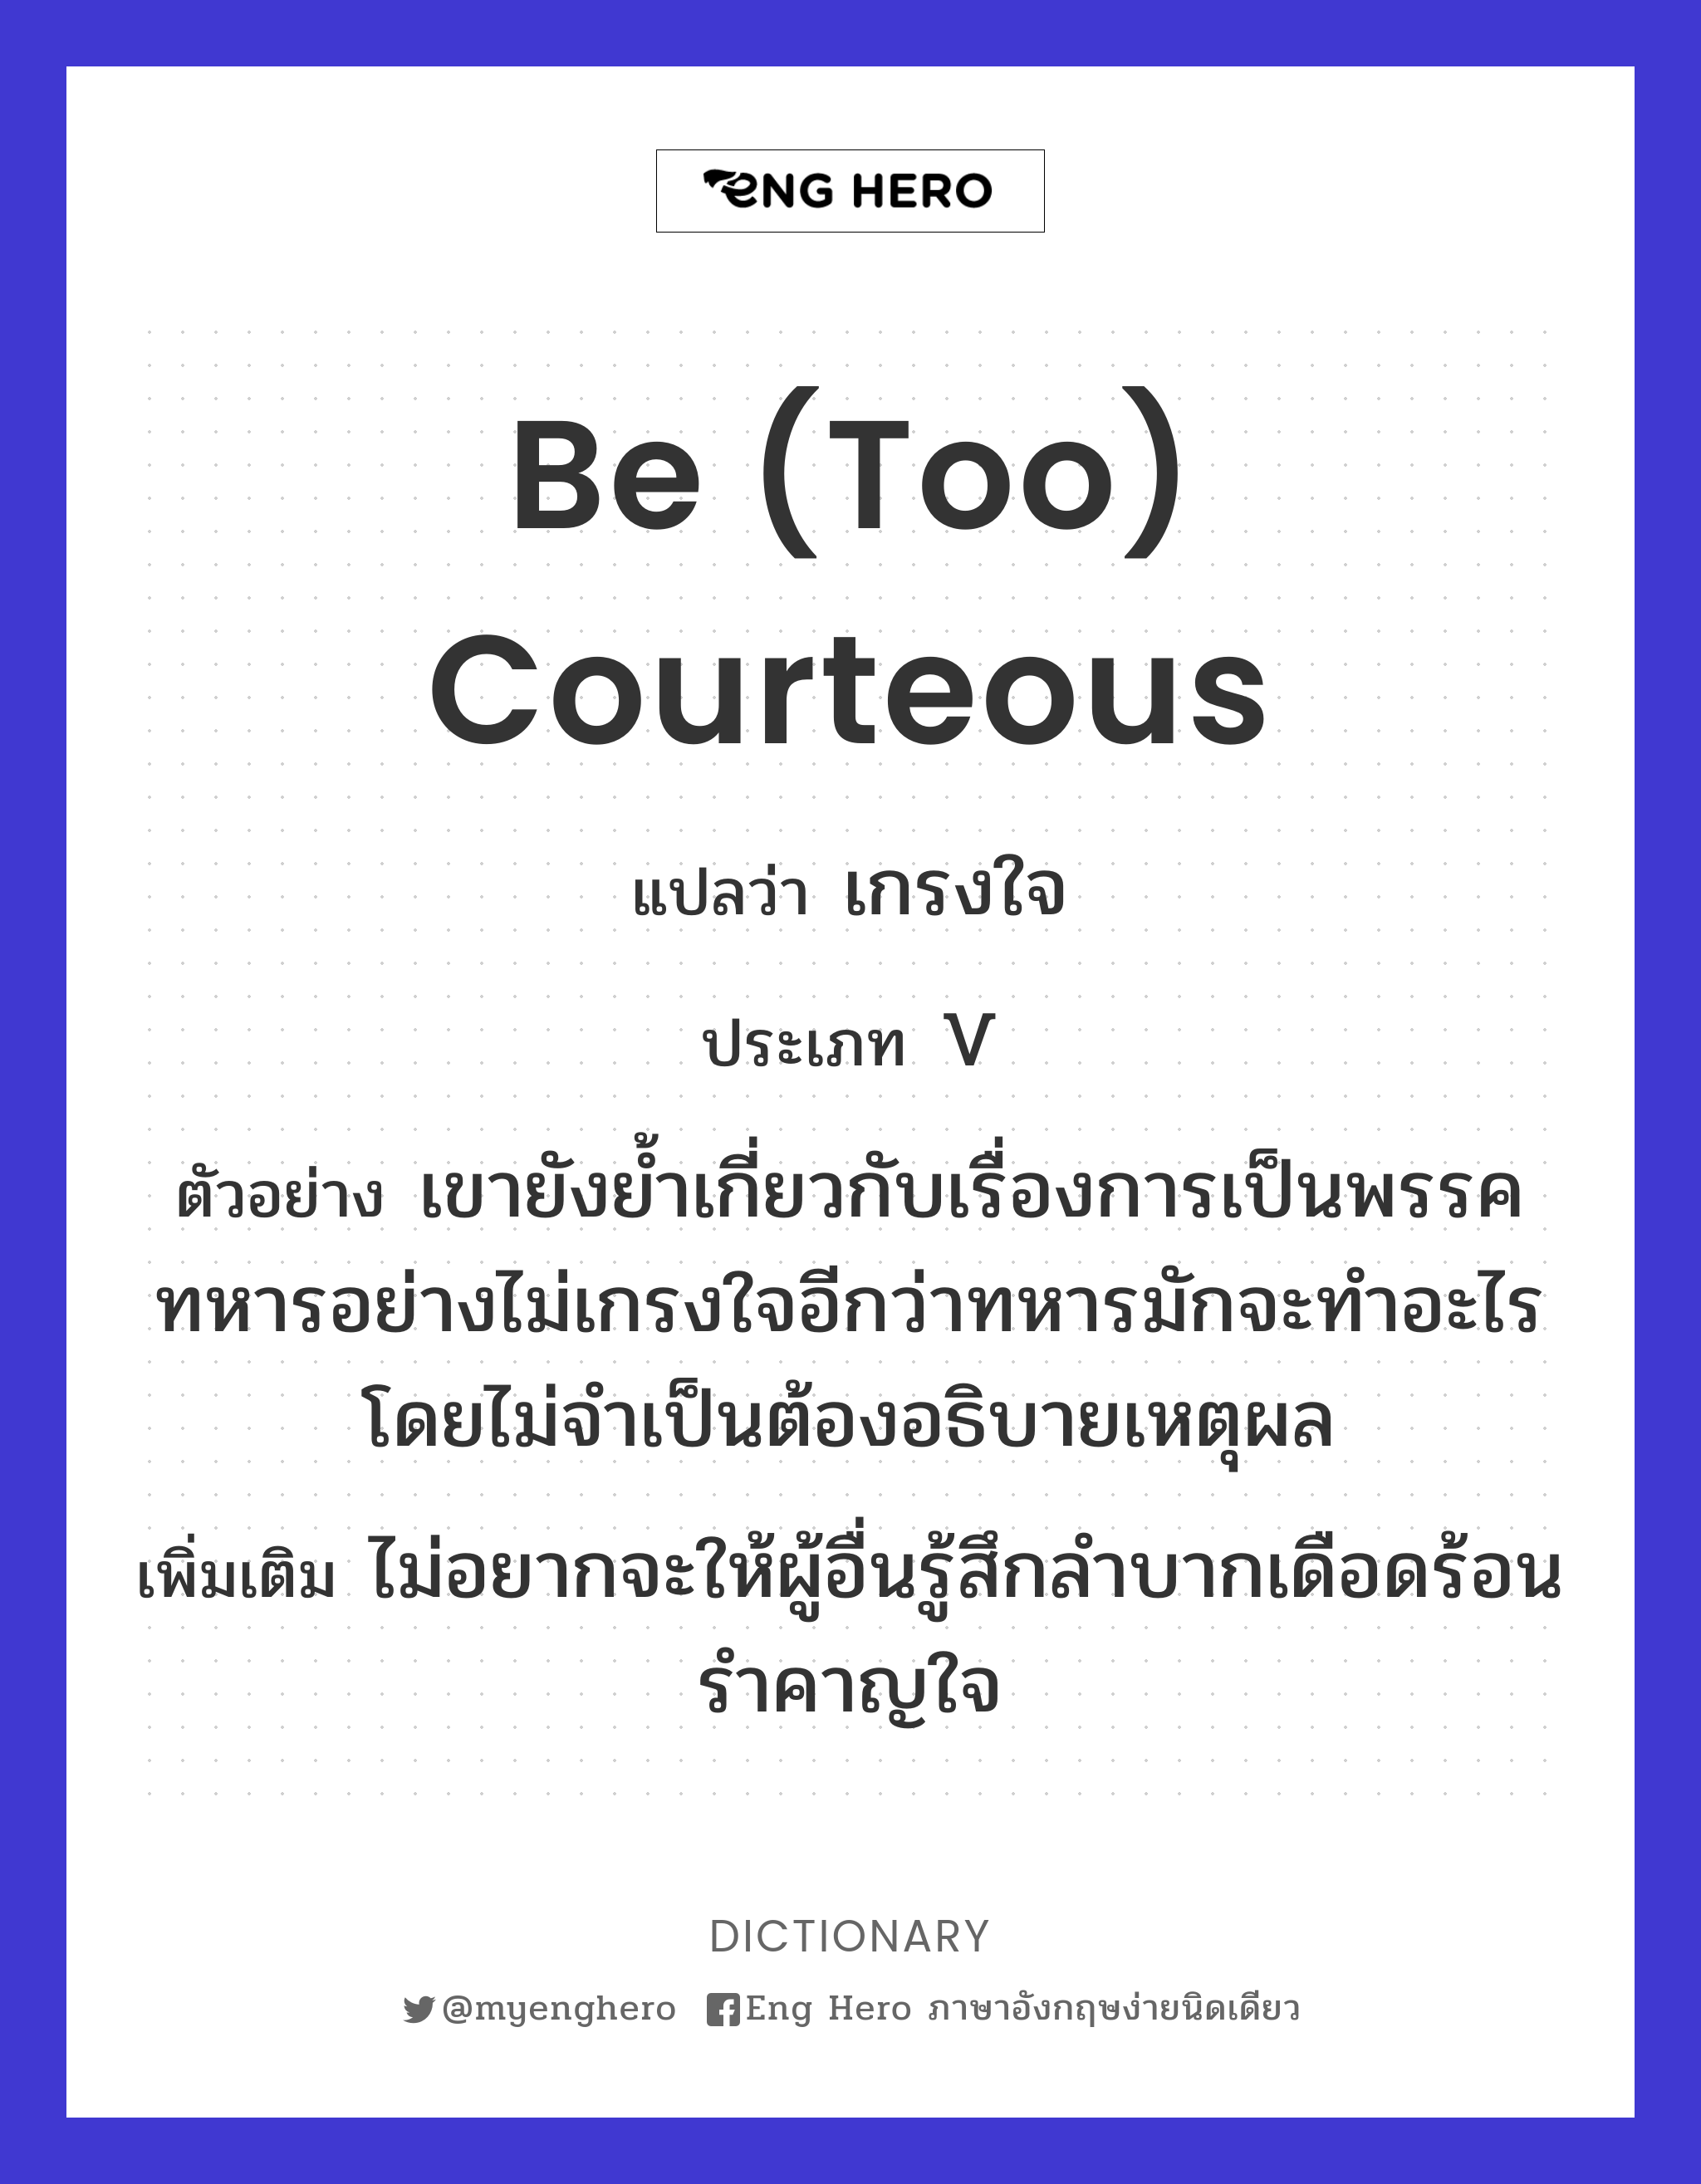 be (too) courteous